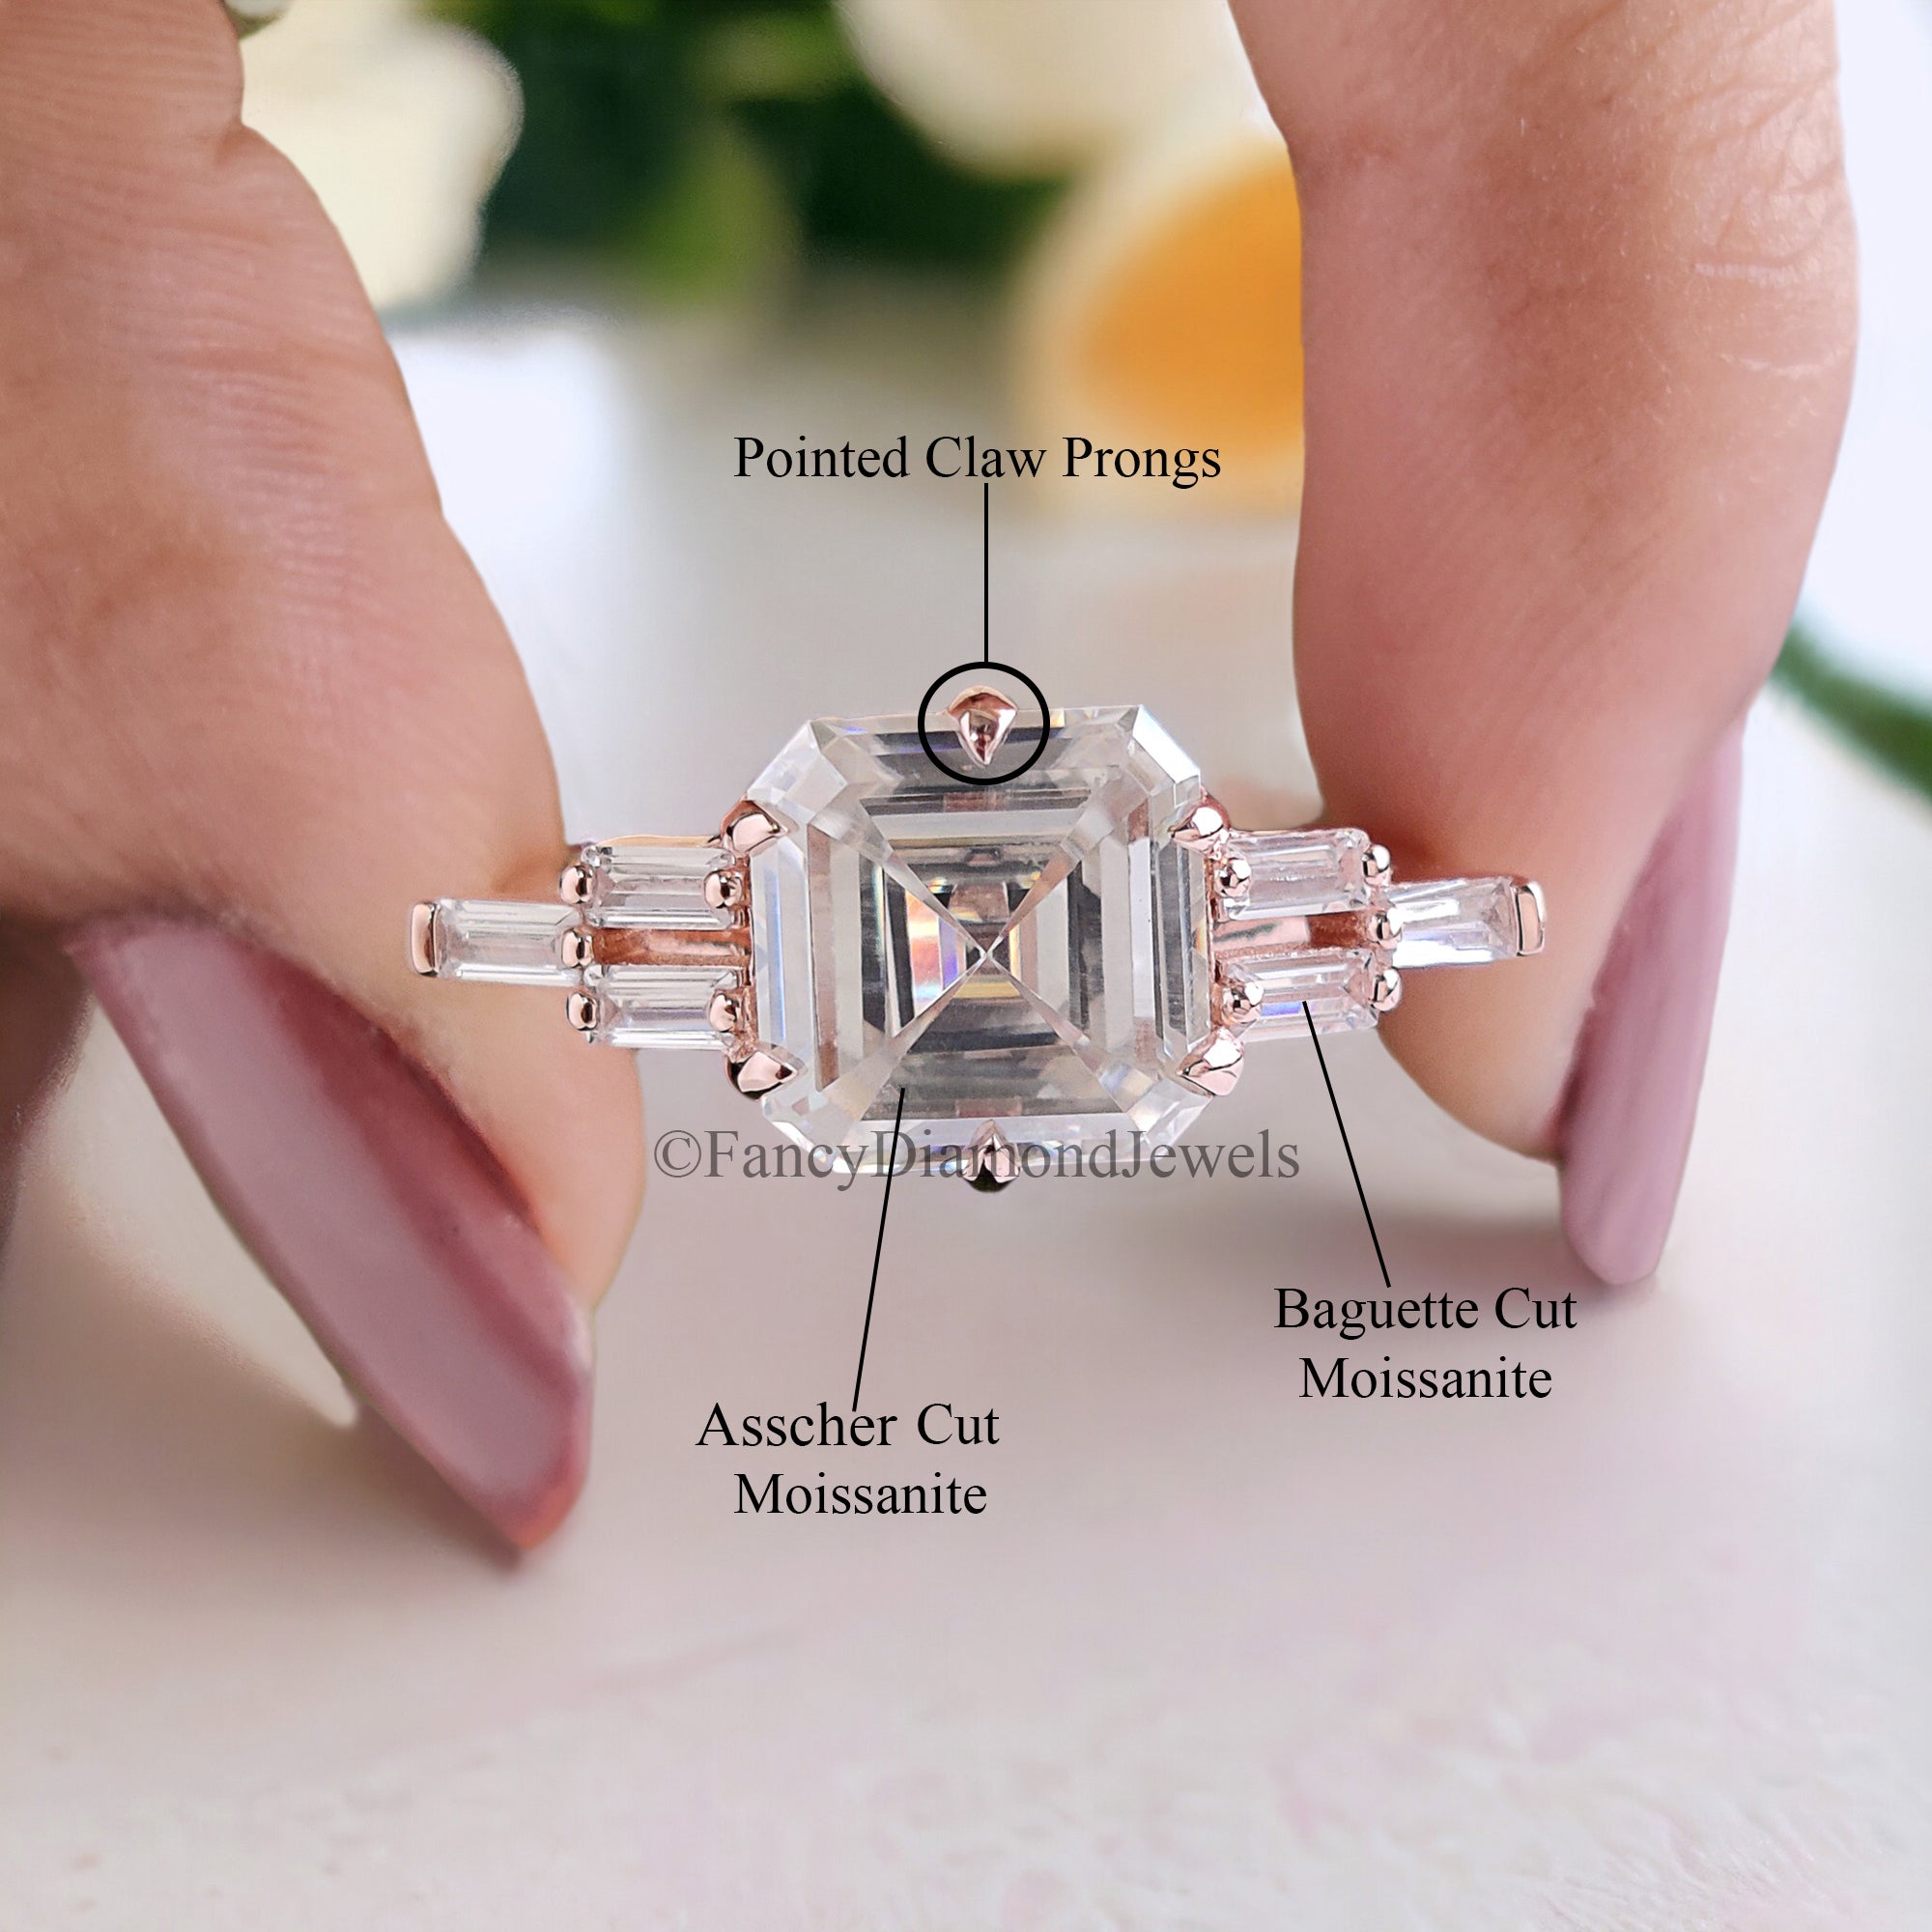 Perfect Anniversary Gift 2.50 CT Asscher Cut Colorless Moissanite Engagement Ring Side baguette Moissanite Wedding Ring Bridal Set Ring FD85